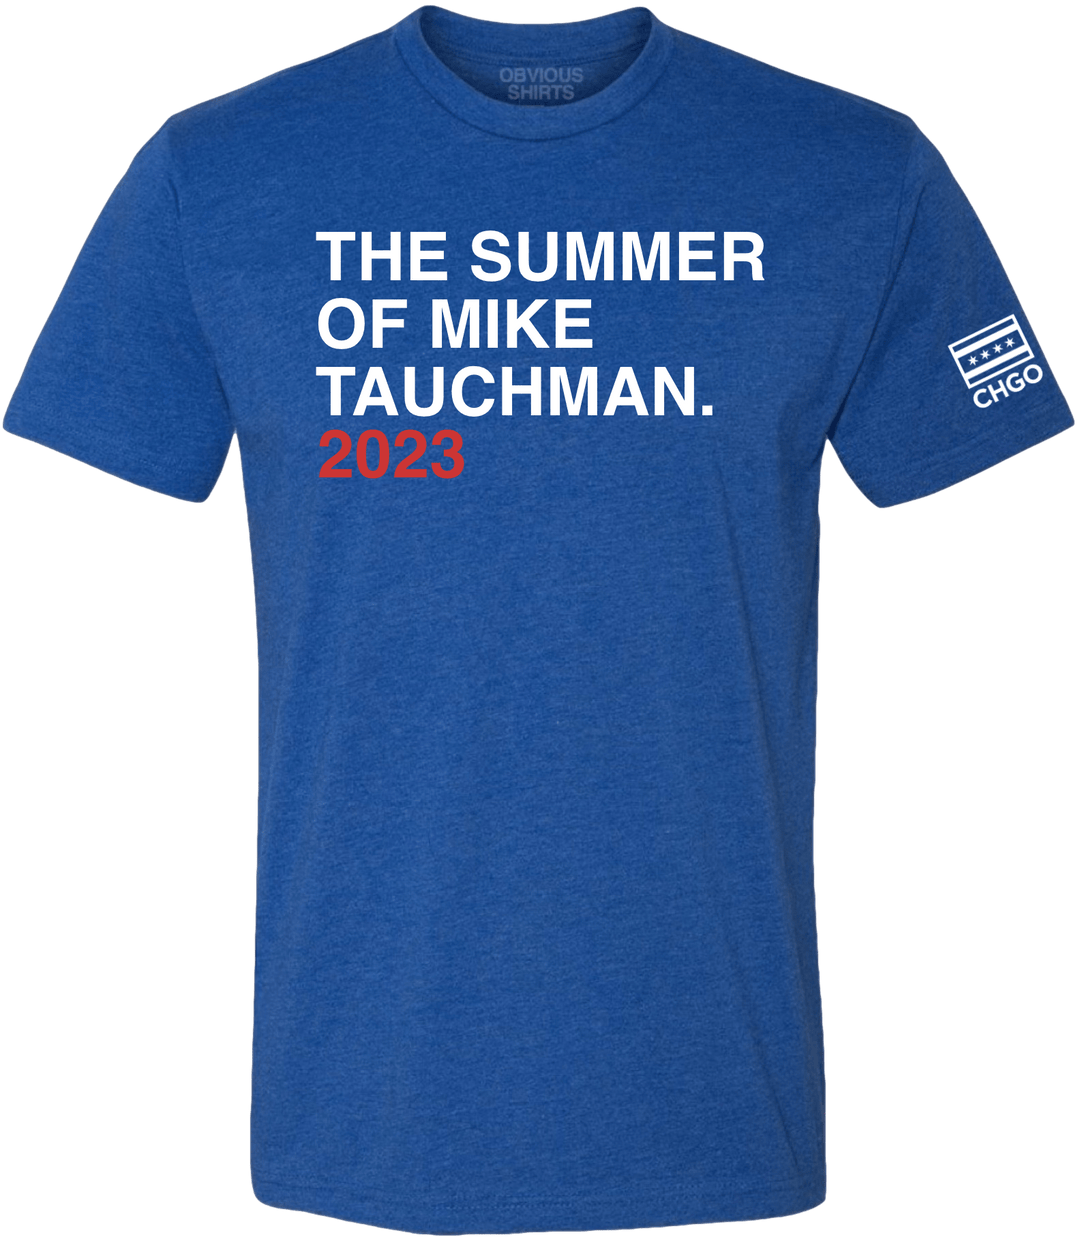 Mike Tauchman on how New York Yankees came to wear 'Savages' shirts